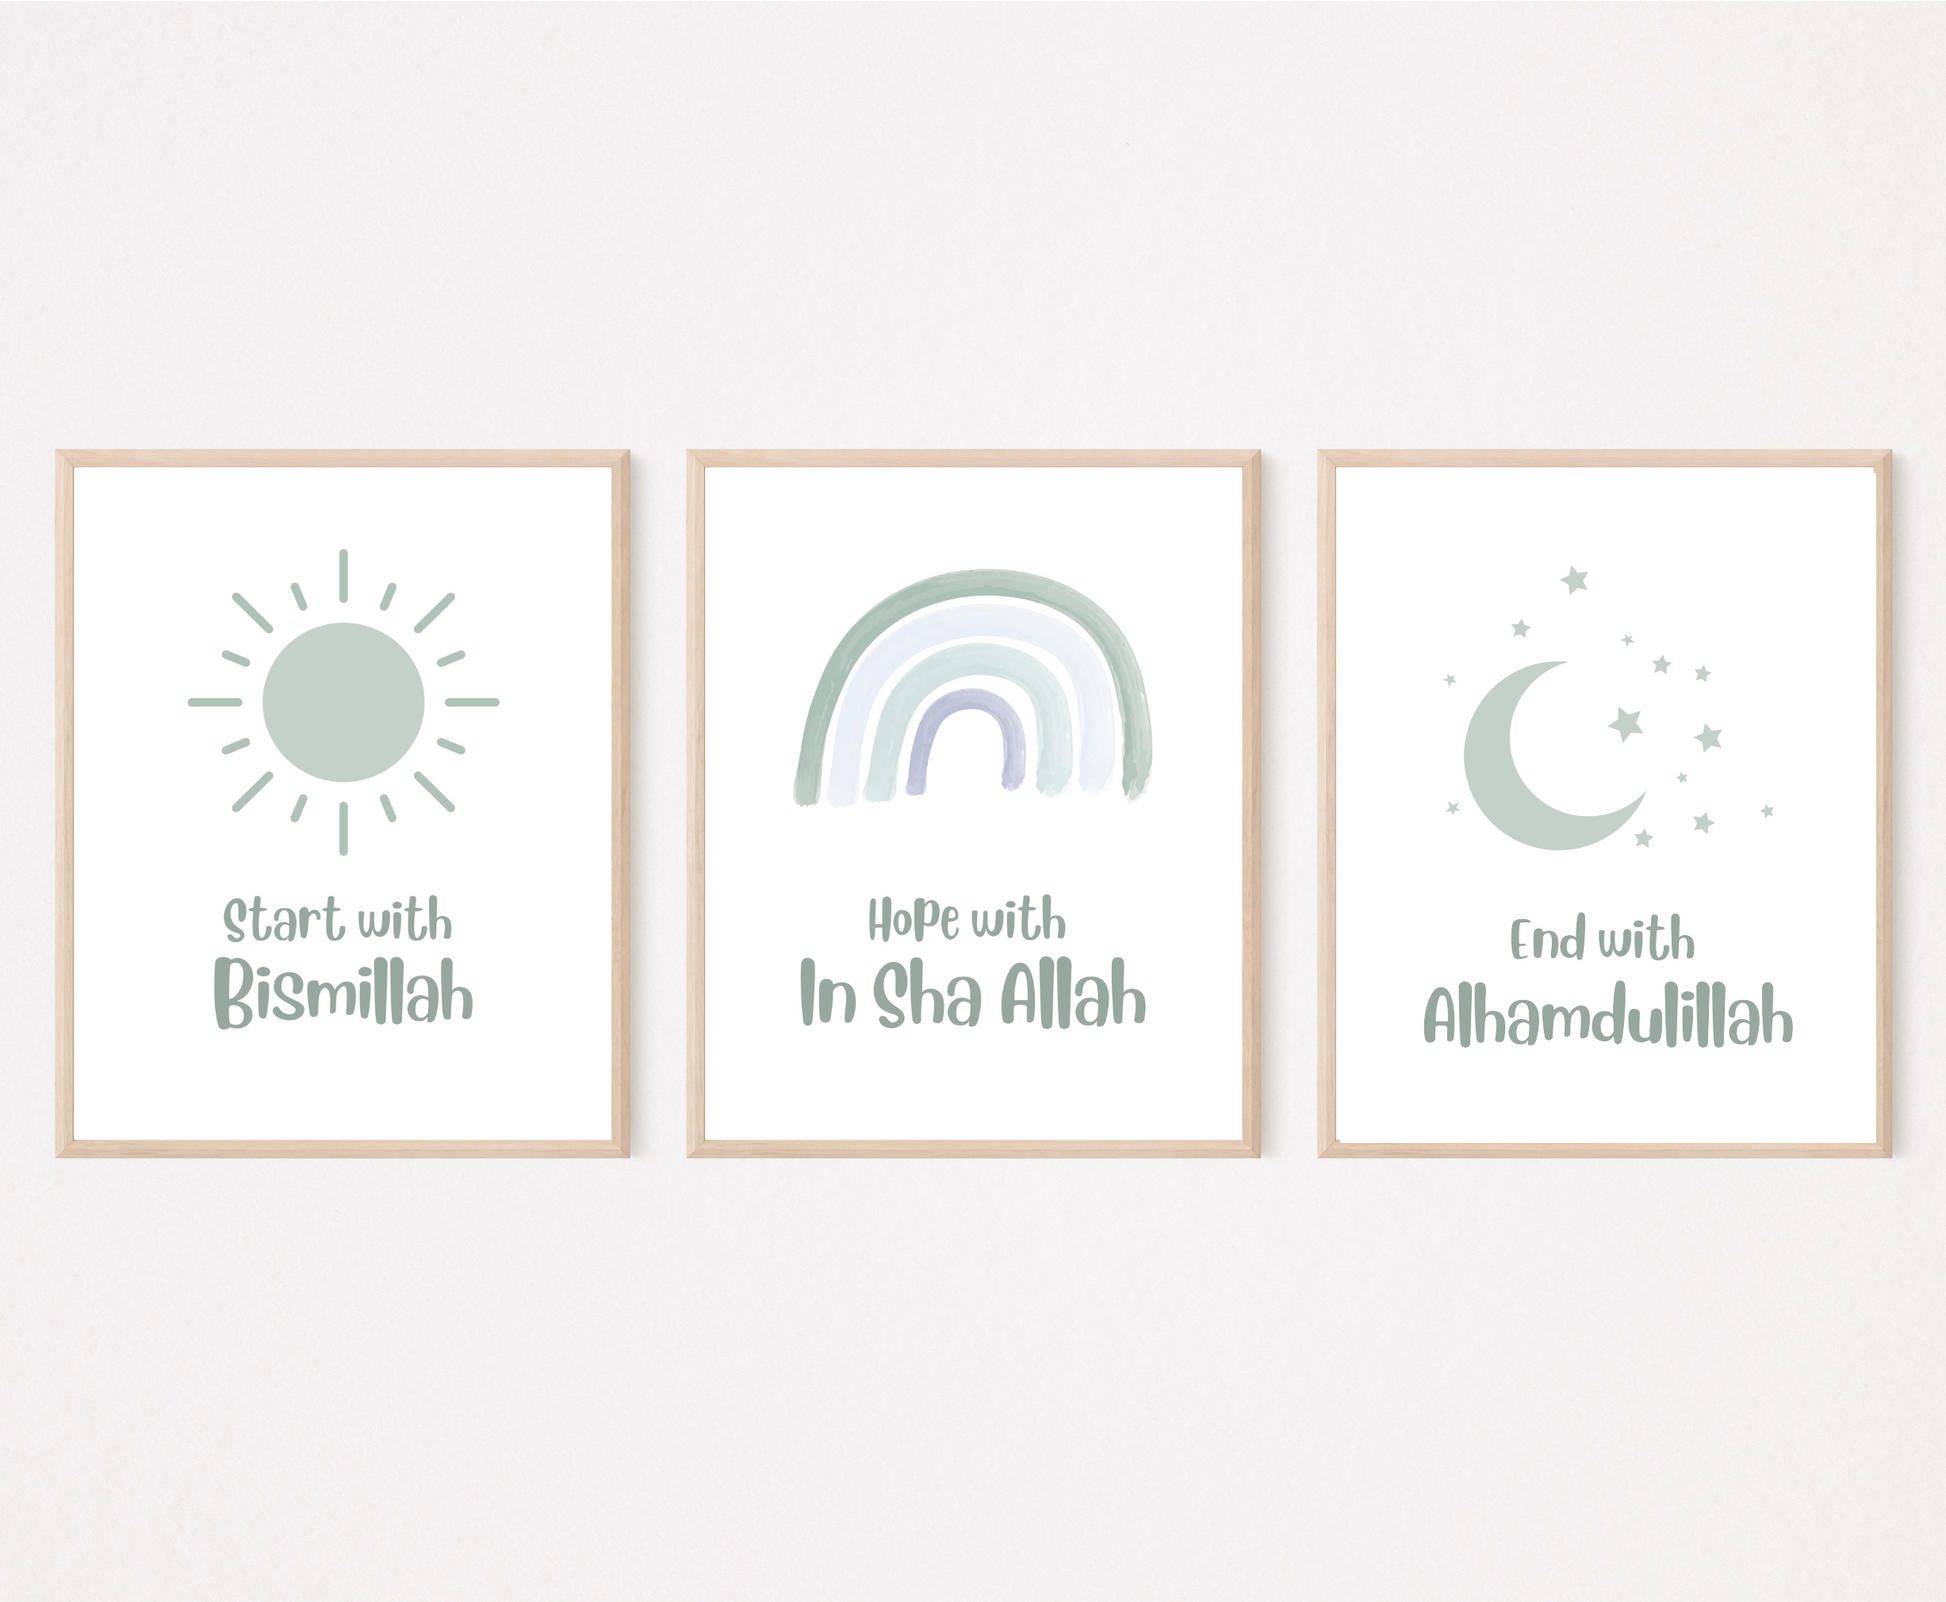 An image showing three digital print graphics. The first one shows a baby green sun with “Start with Bismillah” written right below. The middle graphic is a baby green rainbow with “Hope with In Sha Allah” written just below it. The last frame shows a graphic of a baby green crescent and some tiny stars with “End with Alhamdulillah” written just below the latter.